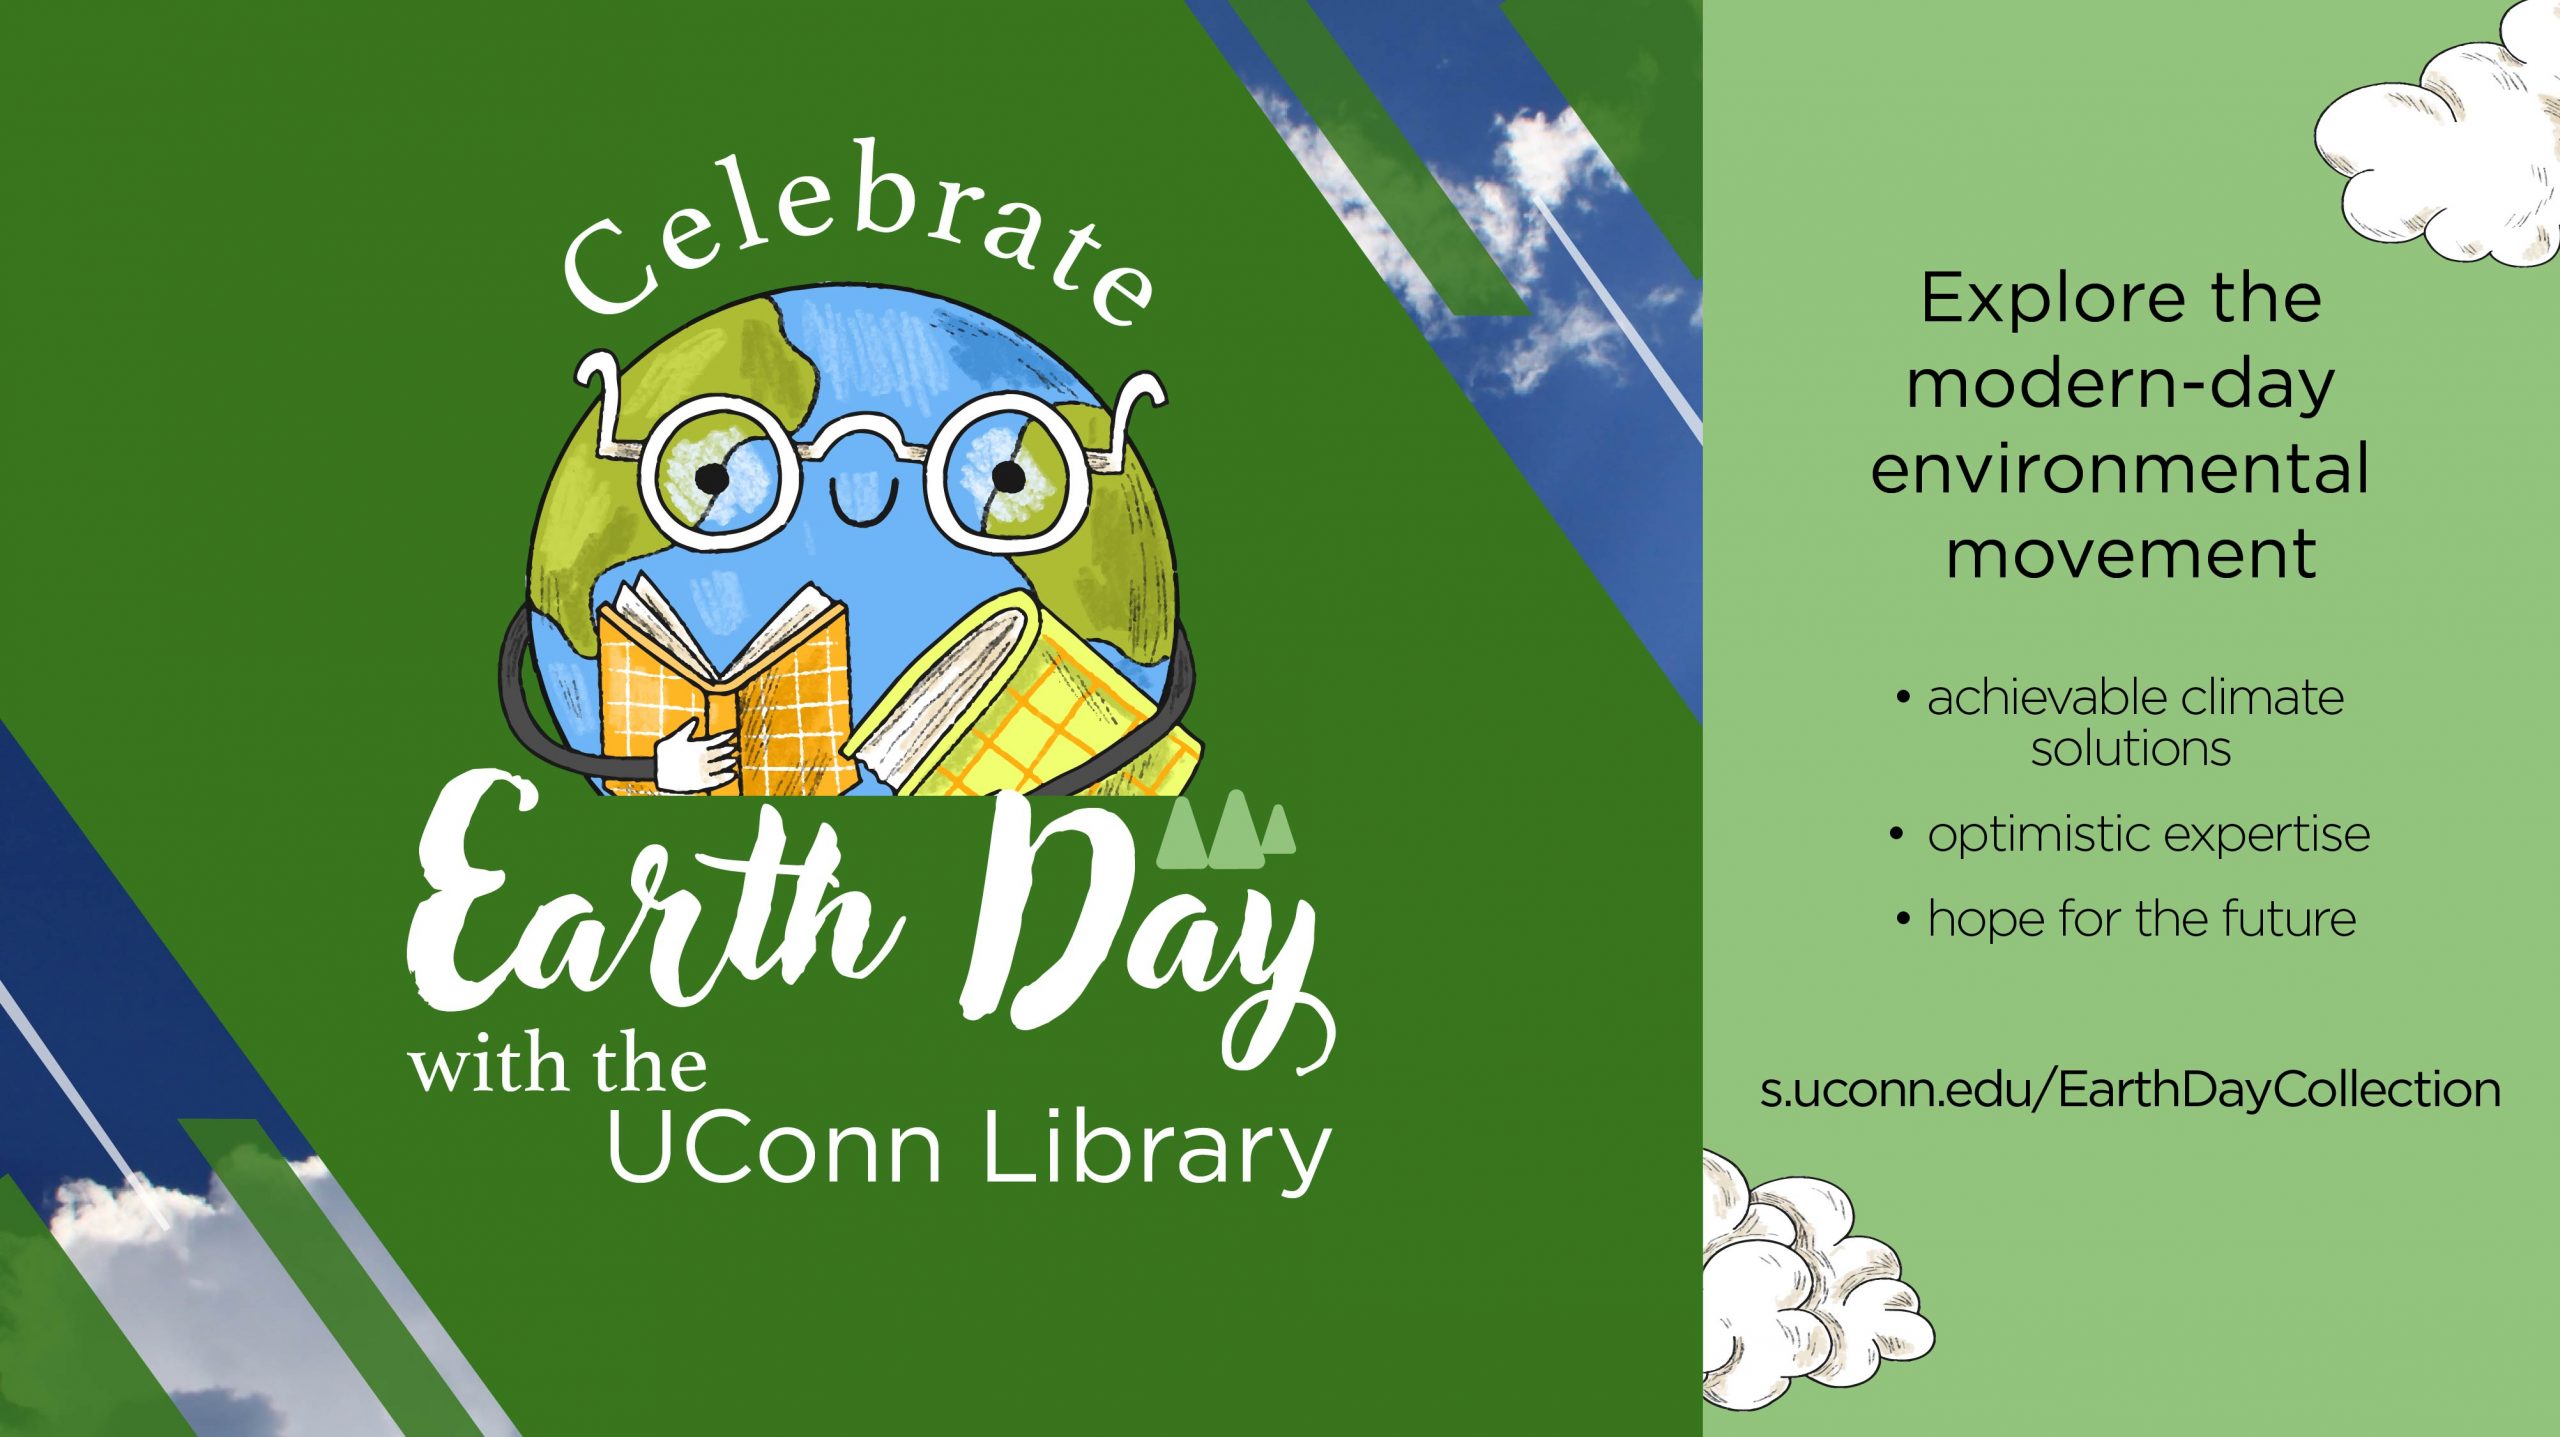 Green background with an illustration of a personified planet Earth, wearing round black glasses and carrying books. Text reads: Celebrate Earth Day with the UConn Library. Explore the modern-day environmental movement. Achievable climate solutions. Optimistic expertise. Hope for the future. Visit s.uconn.edu/EarthDayCollection